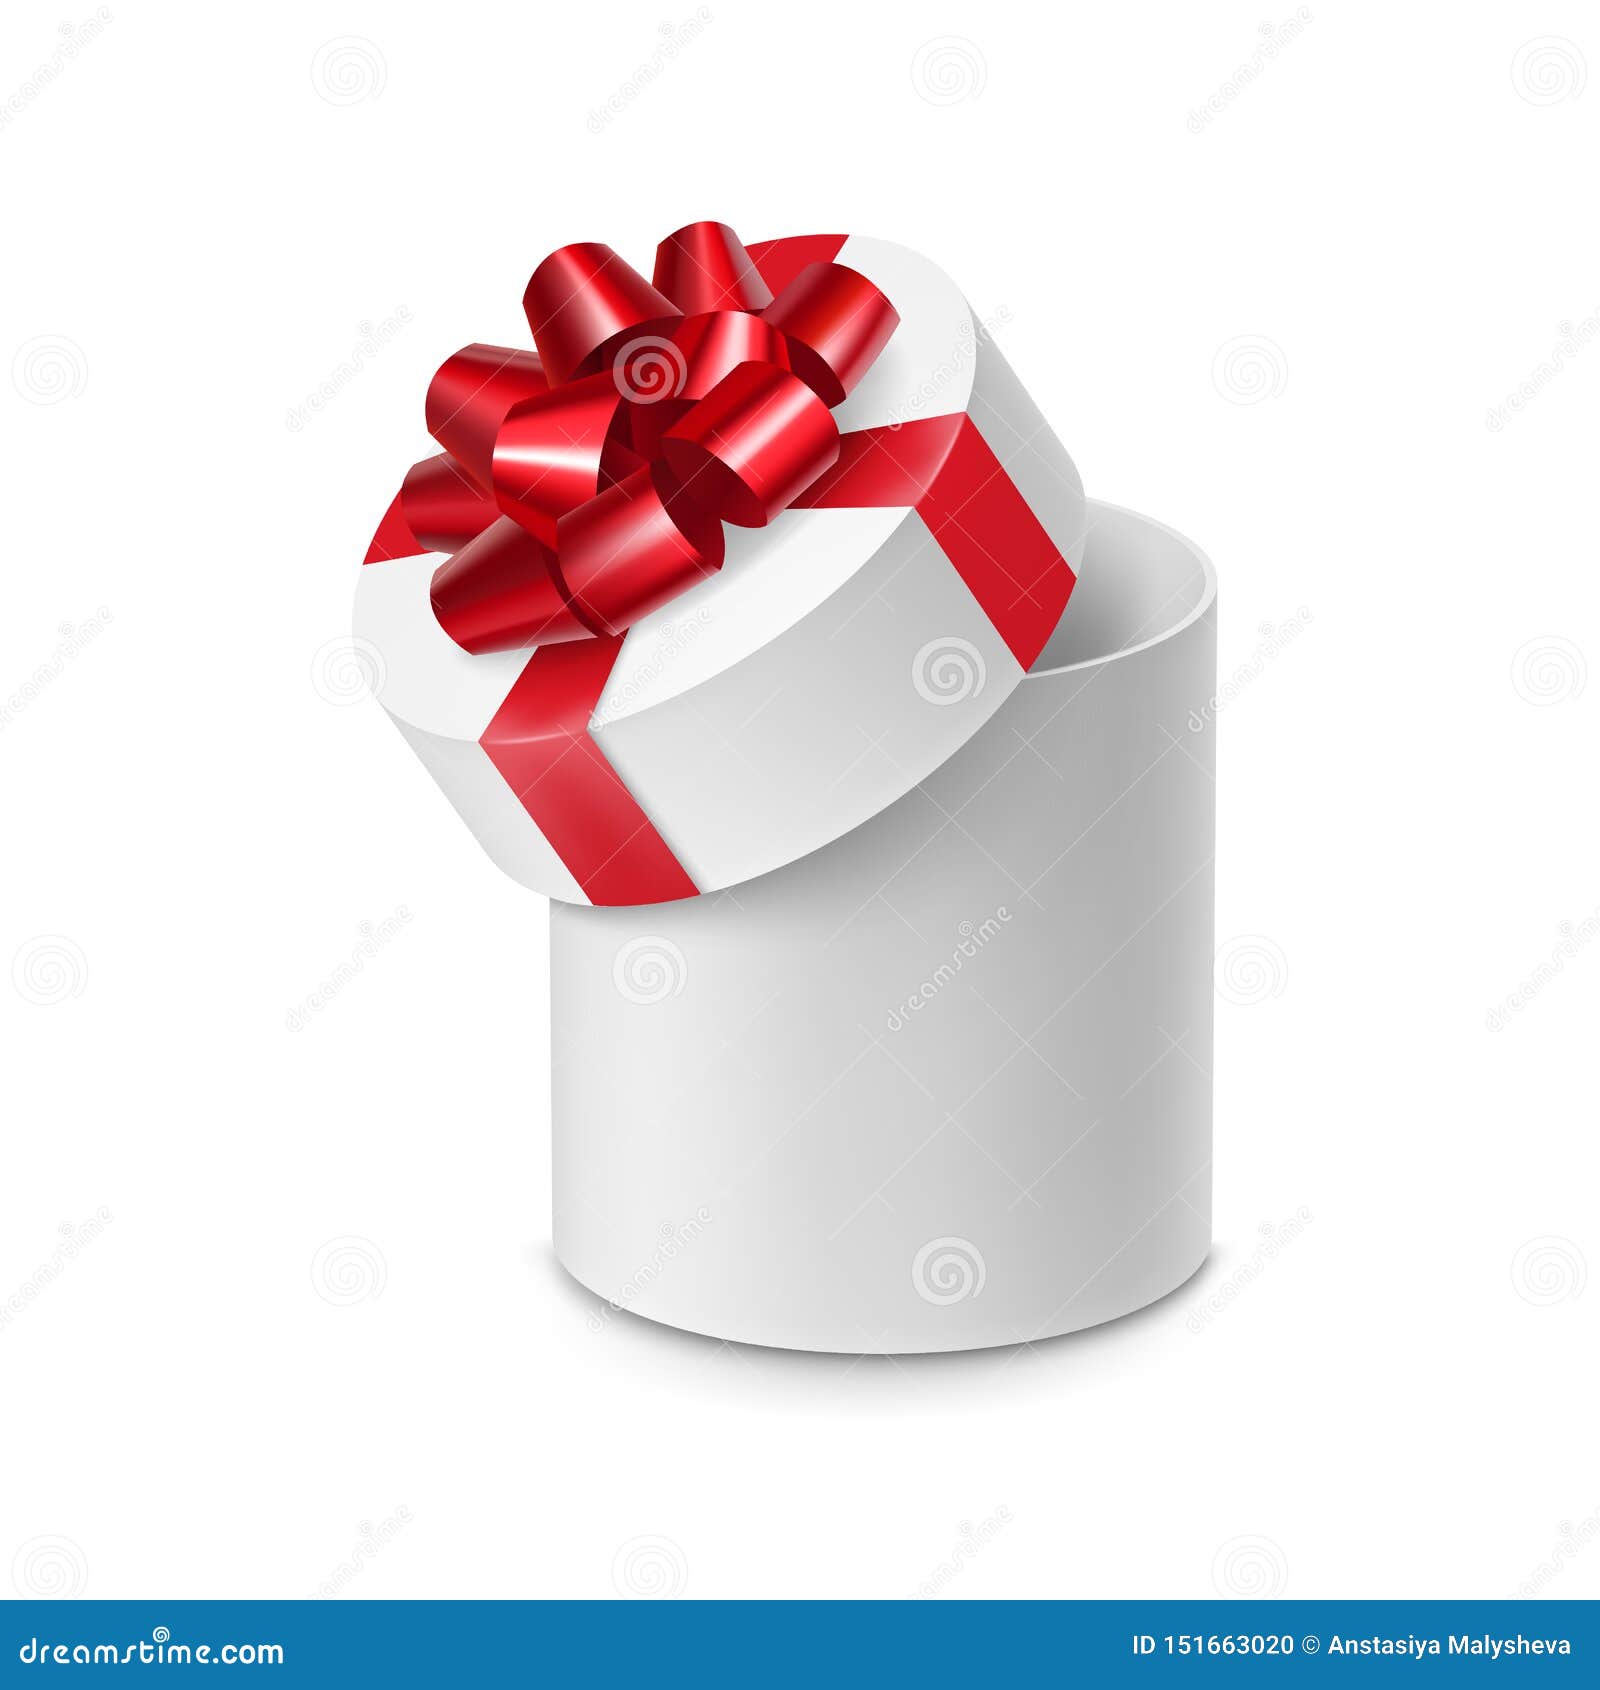 Realistic 3d white gift box with red glossy ribbon bow isolated on